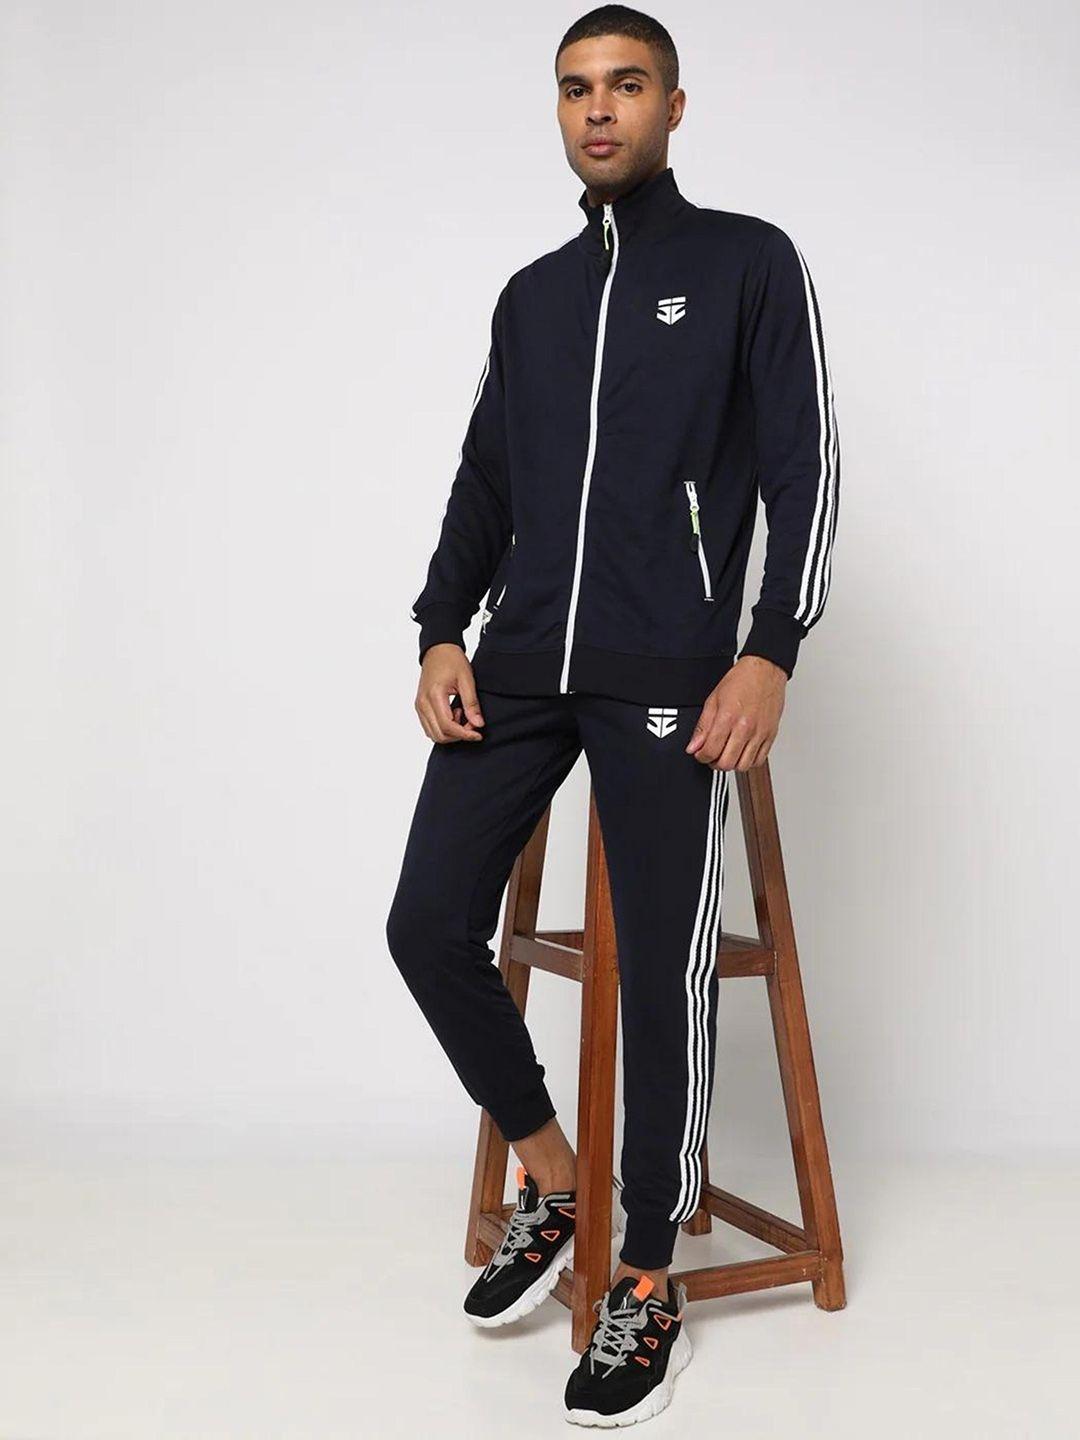 sports52 wear men navy blue brand logo printed pure cotton tracksuit with side stripes